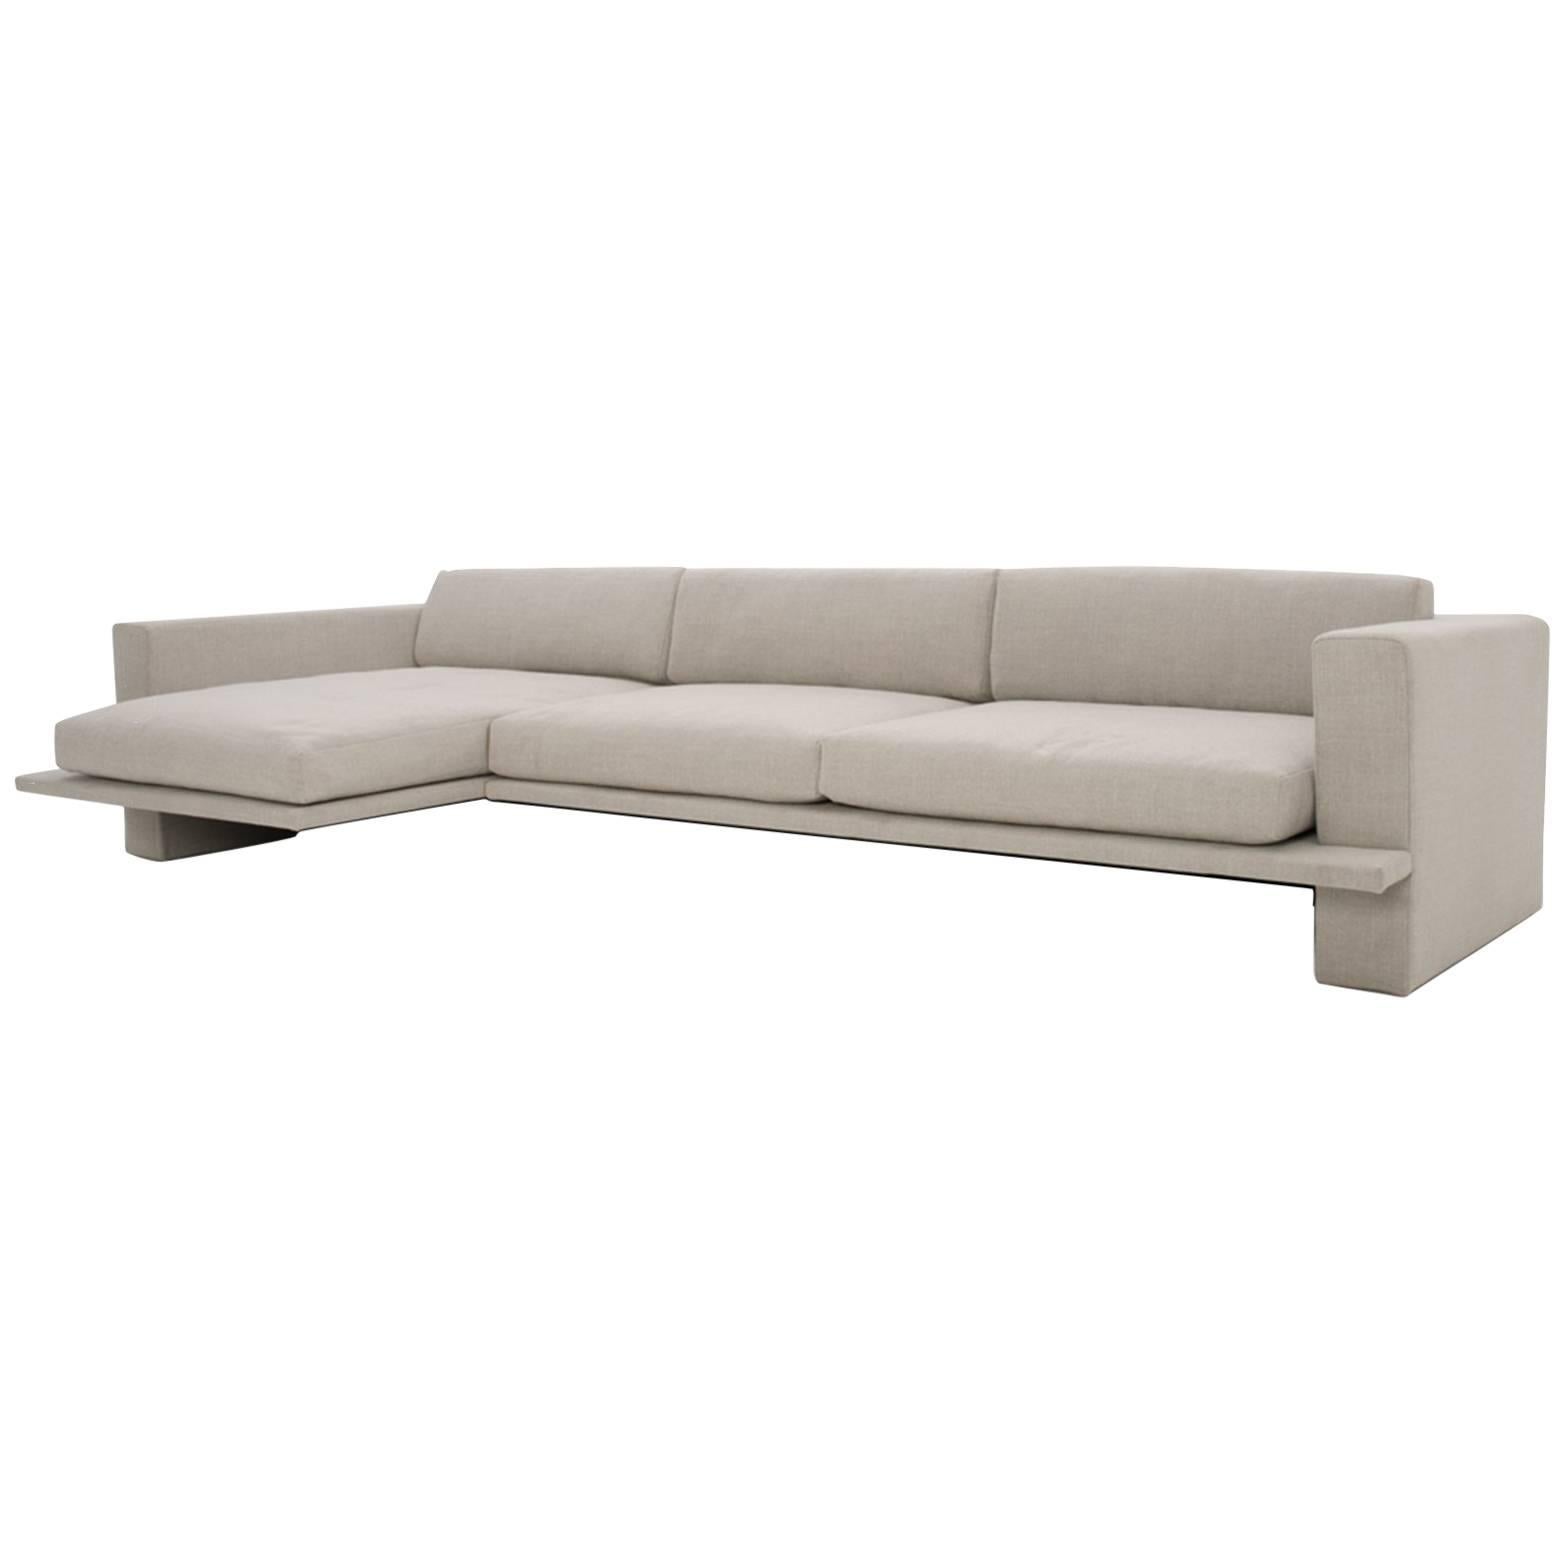 Palisades Sectional Sofa LAXseries by MASHstudios For Sale